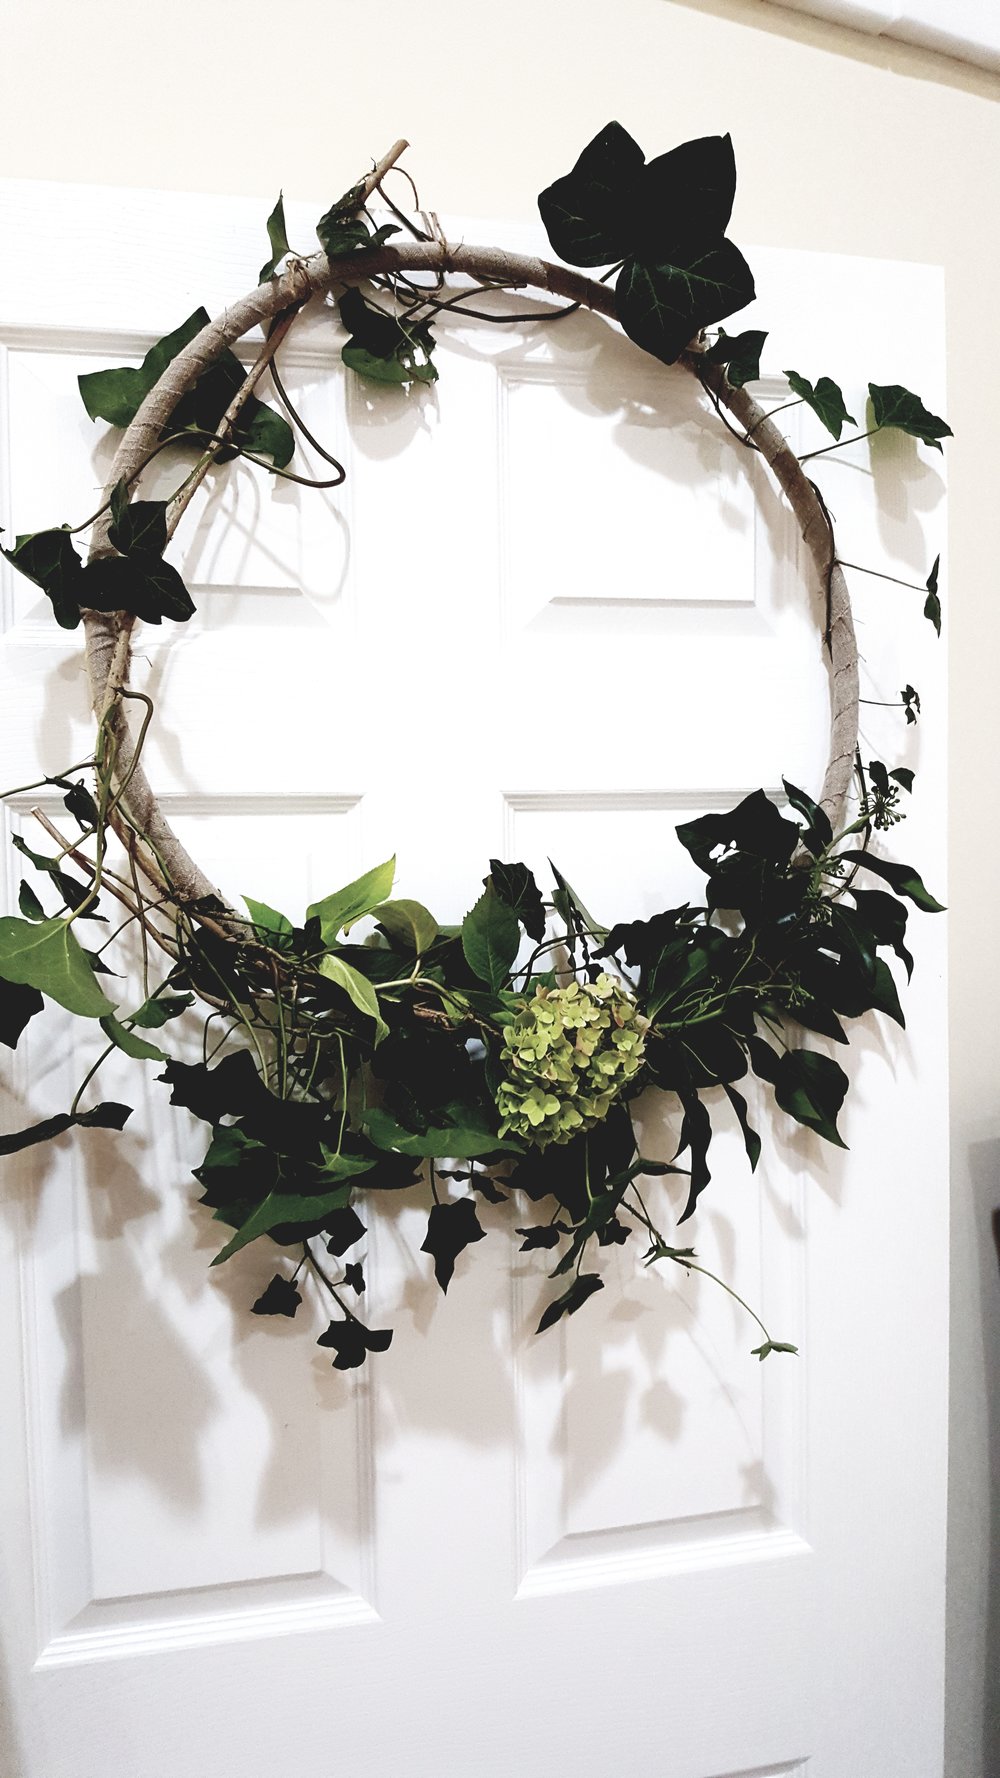  The humble hula hoop transformed by Beth into a gorgeous modern rustic wall hanging 